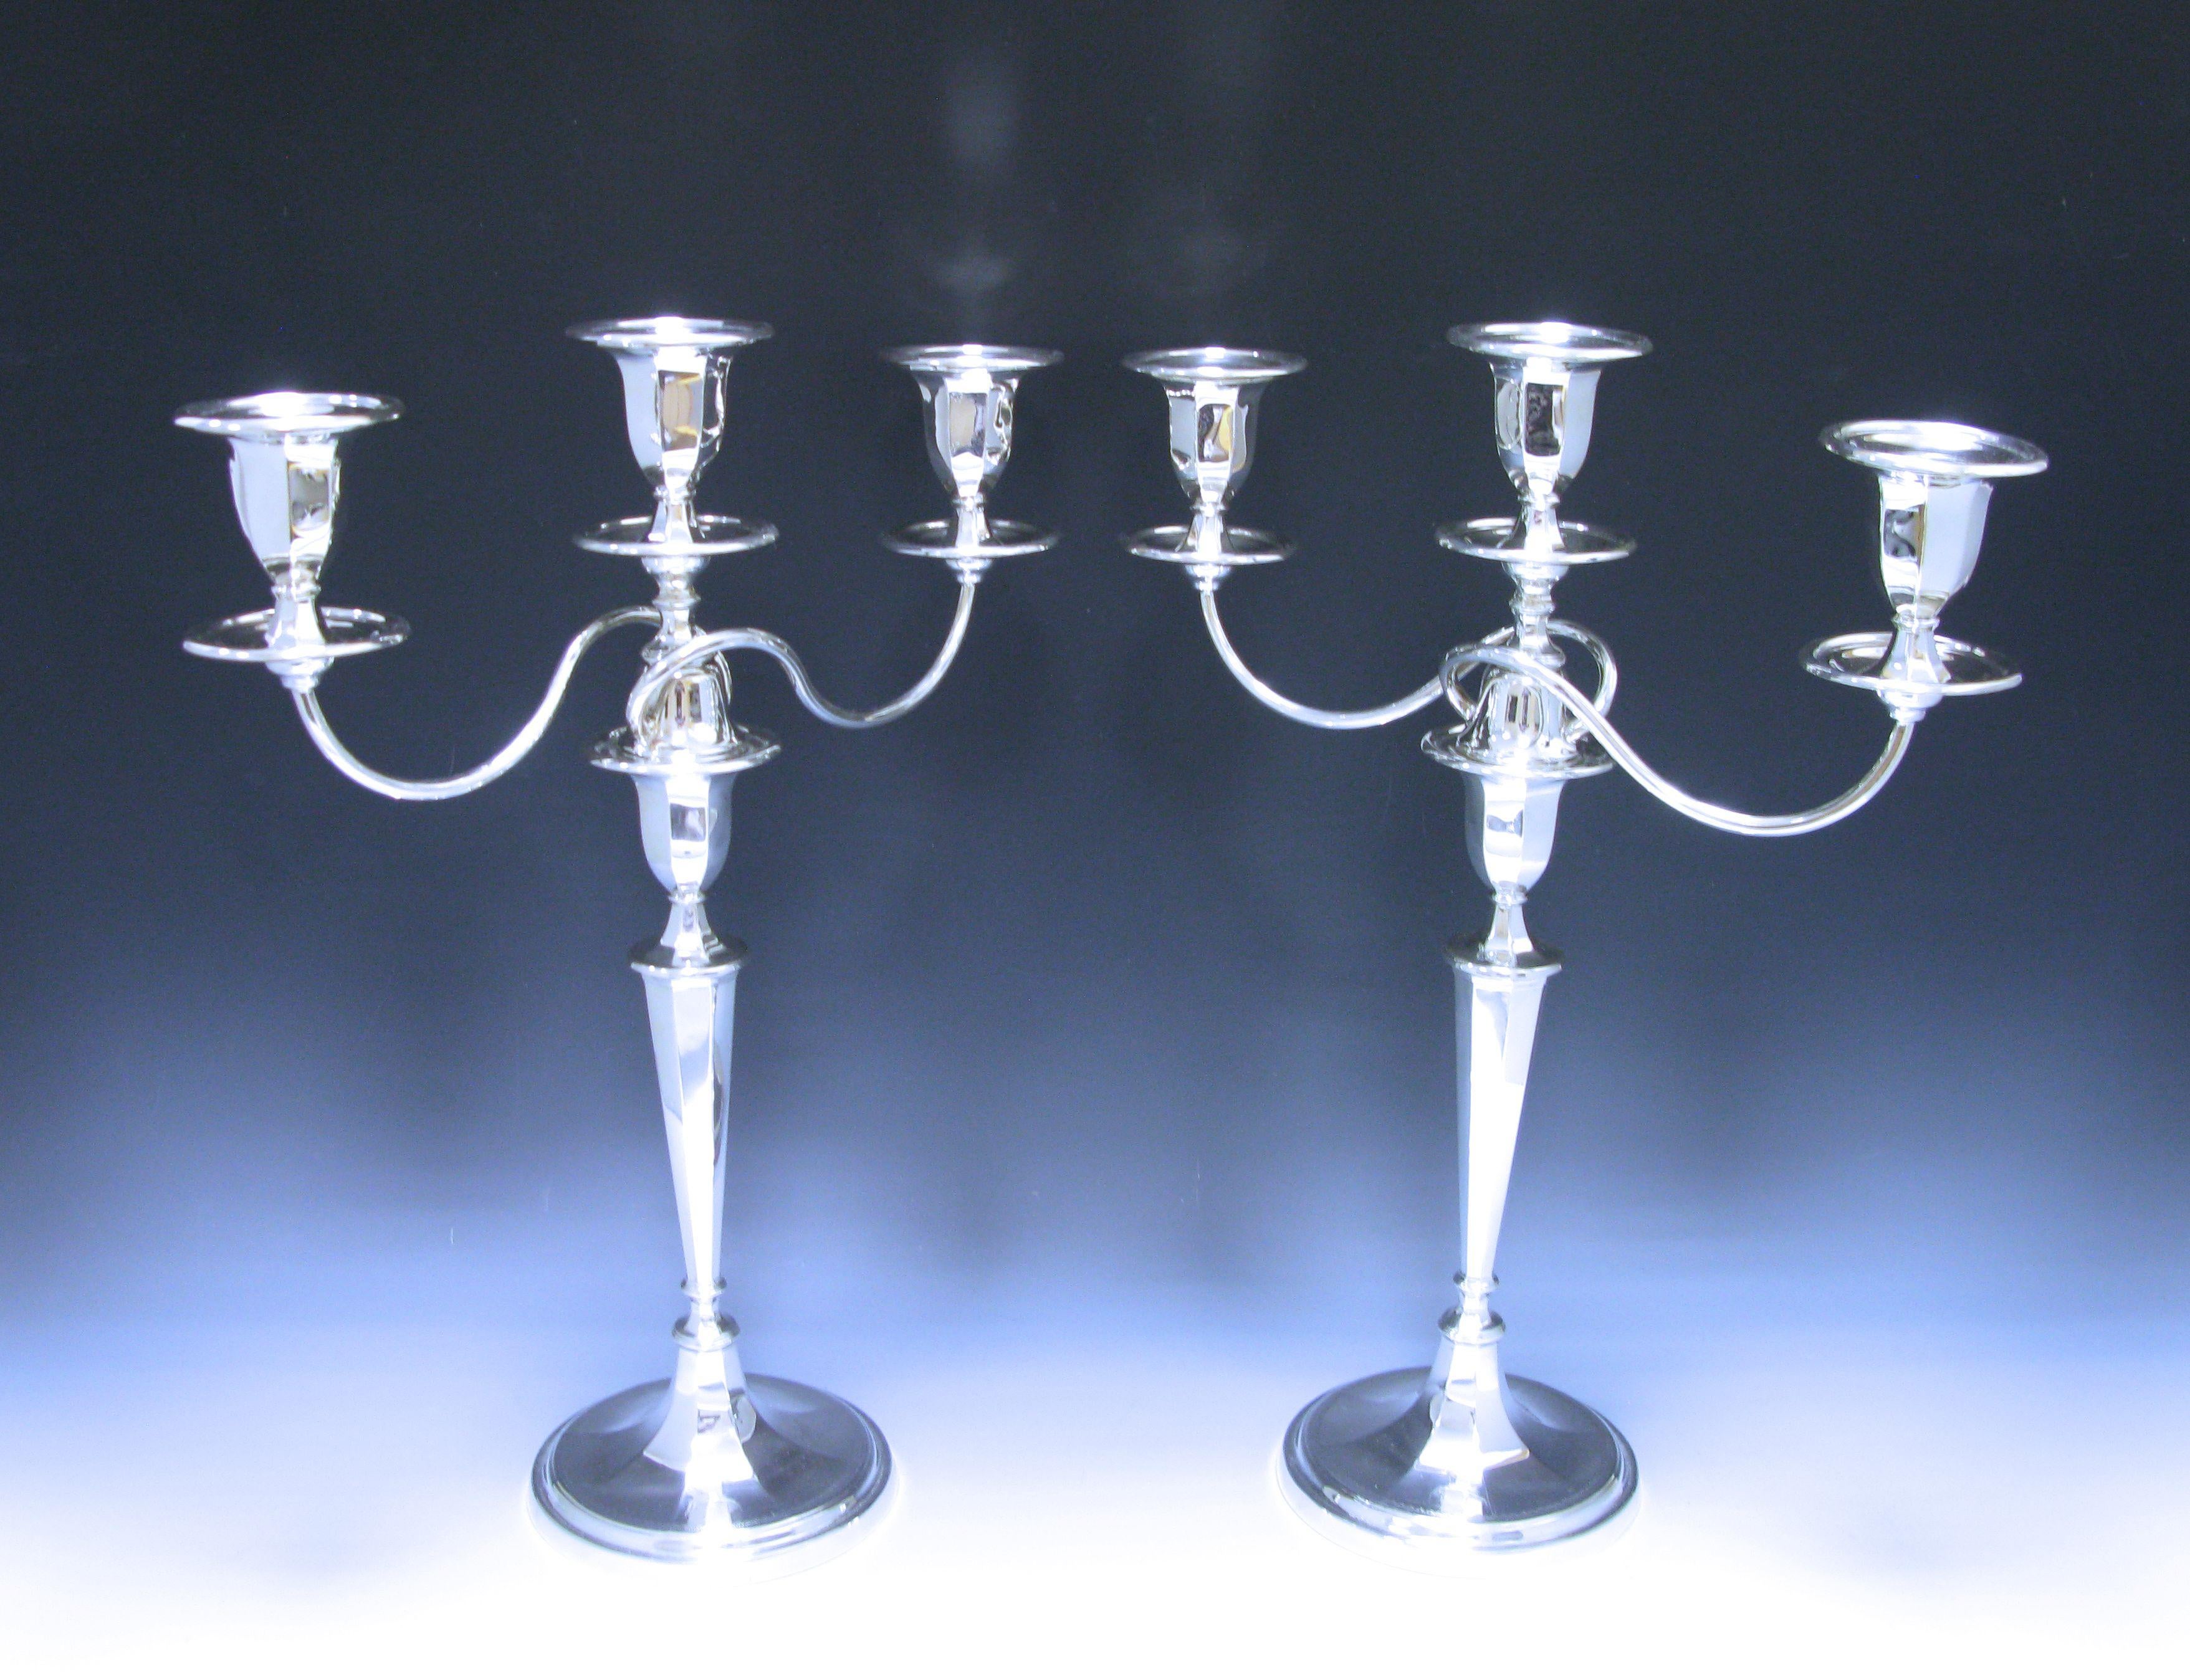 Georgian Pair of George V Antique Sterling Silver Three-Light Candelabra Made in 1912 For Sale